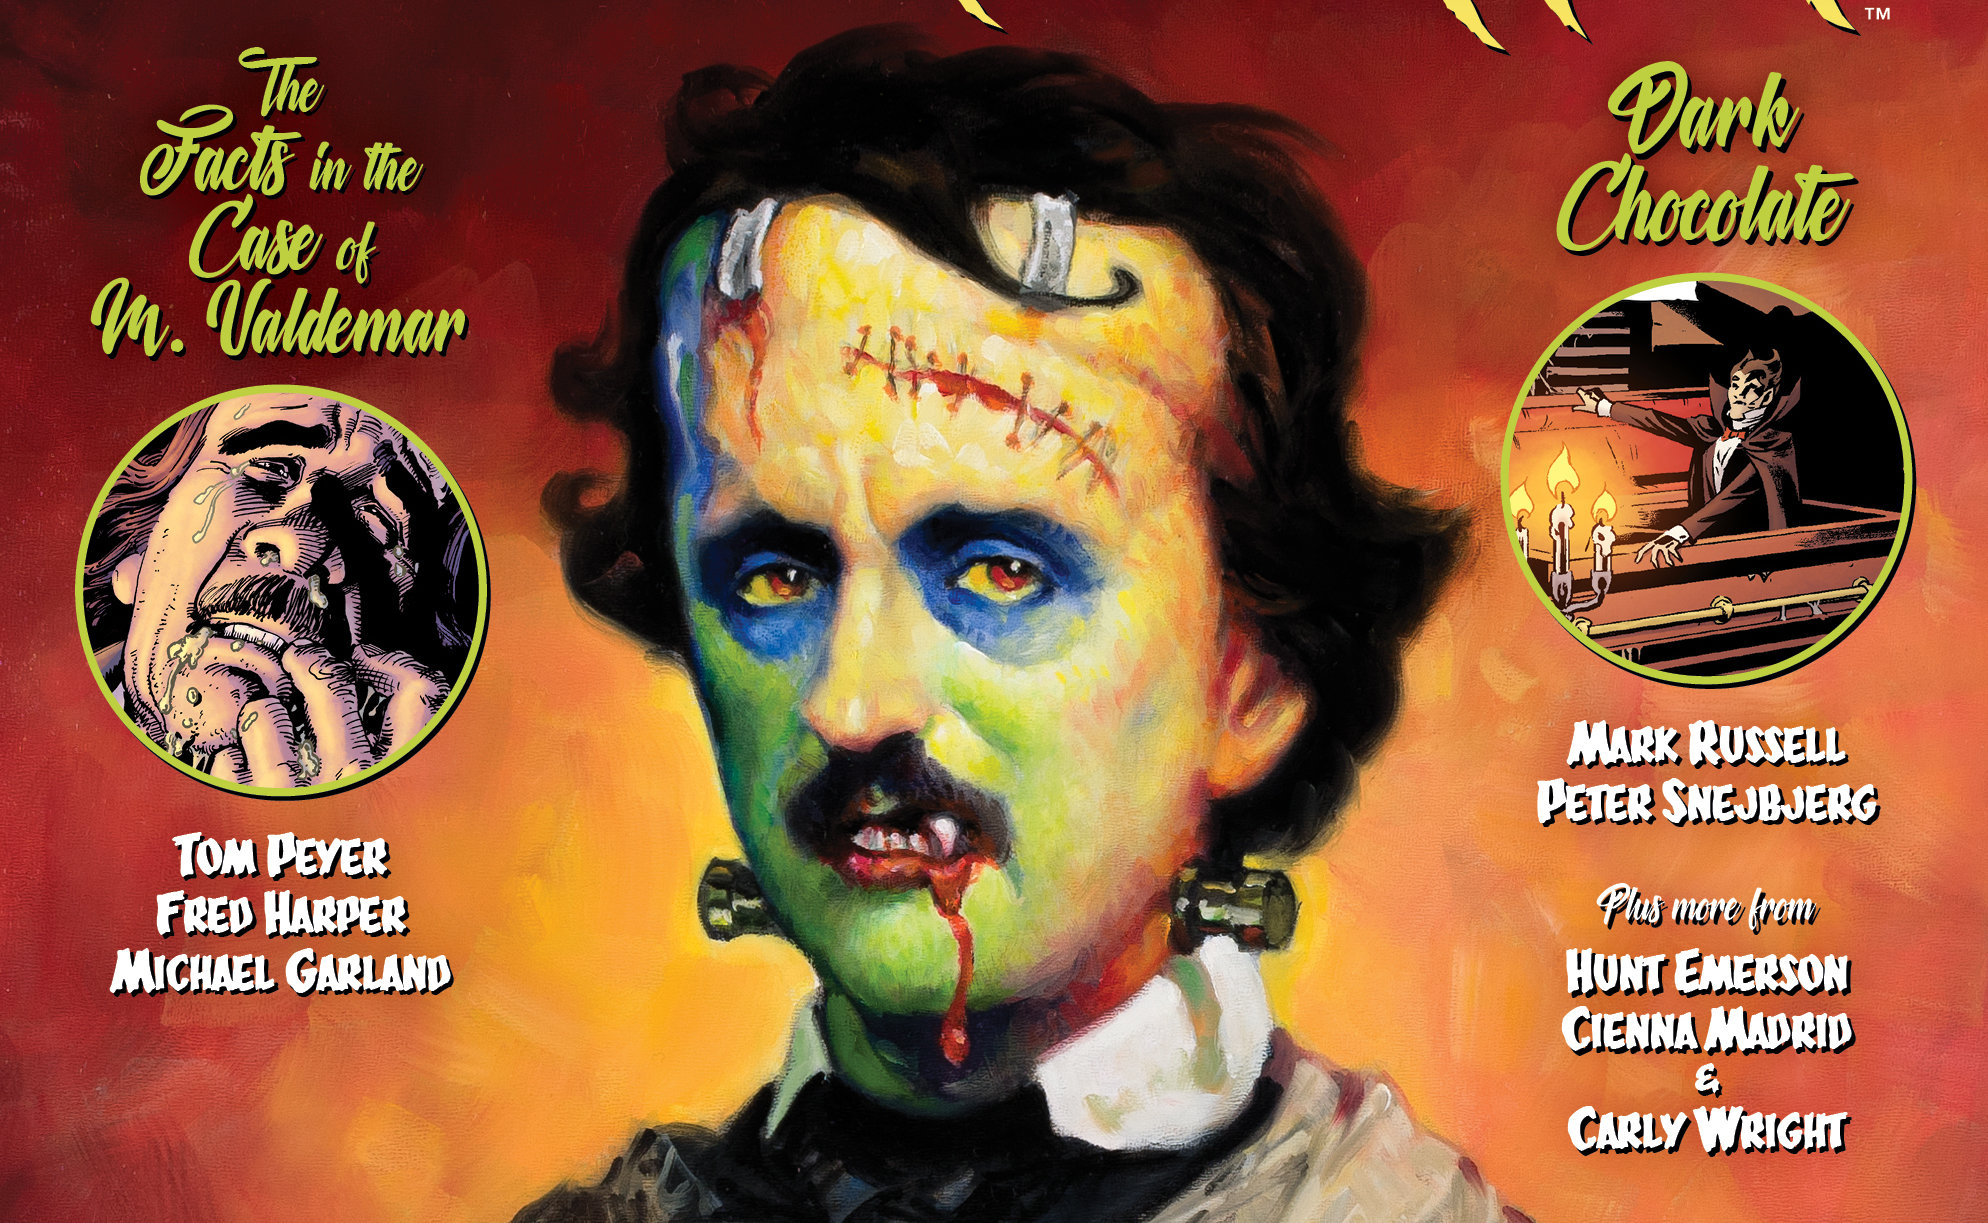 Talking 'Edgar Allan Poe's Snifter of Terror' with Tom Peyer and Mark Russell